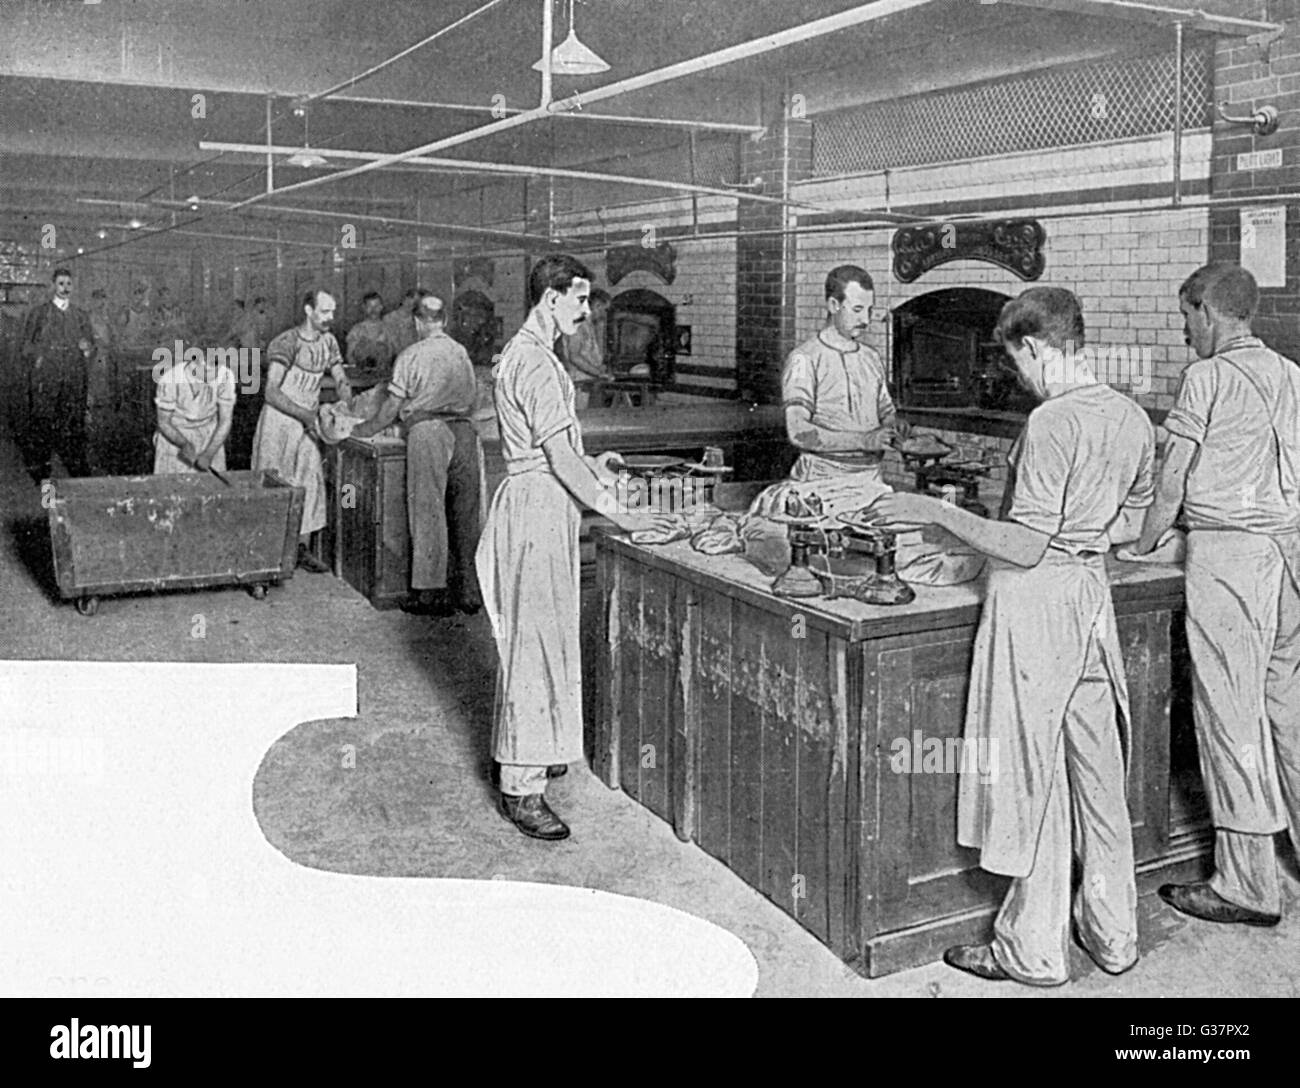 A large English bakery -  Messrs Lyons, of London         Date: 1900 Stock Photo